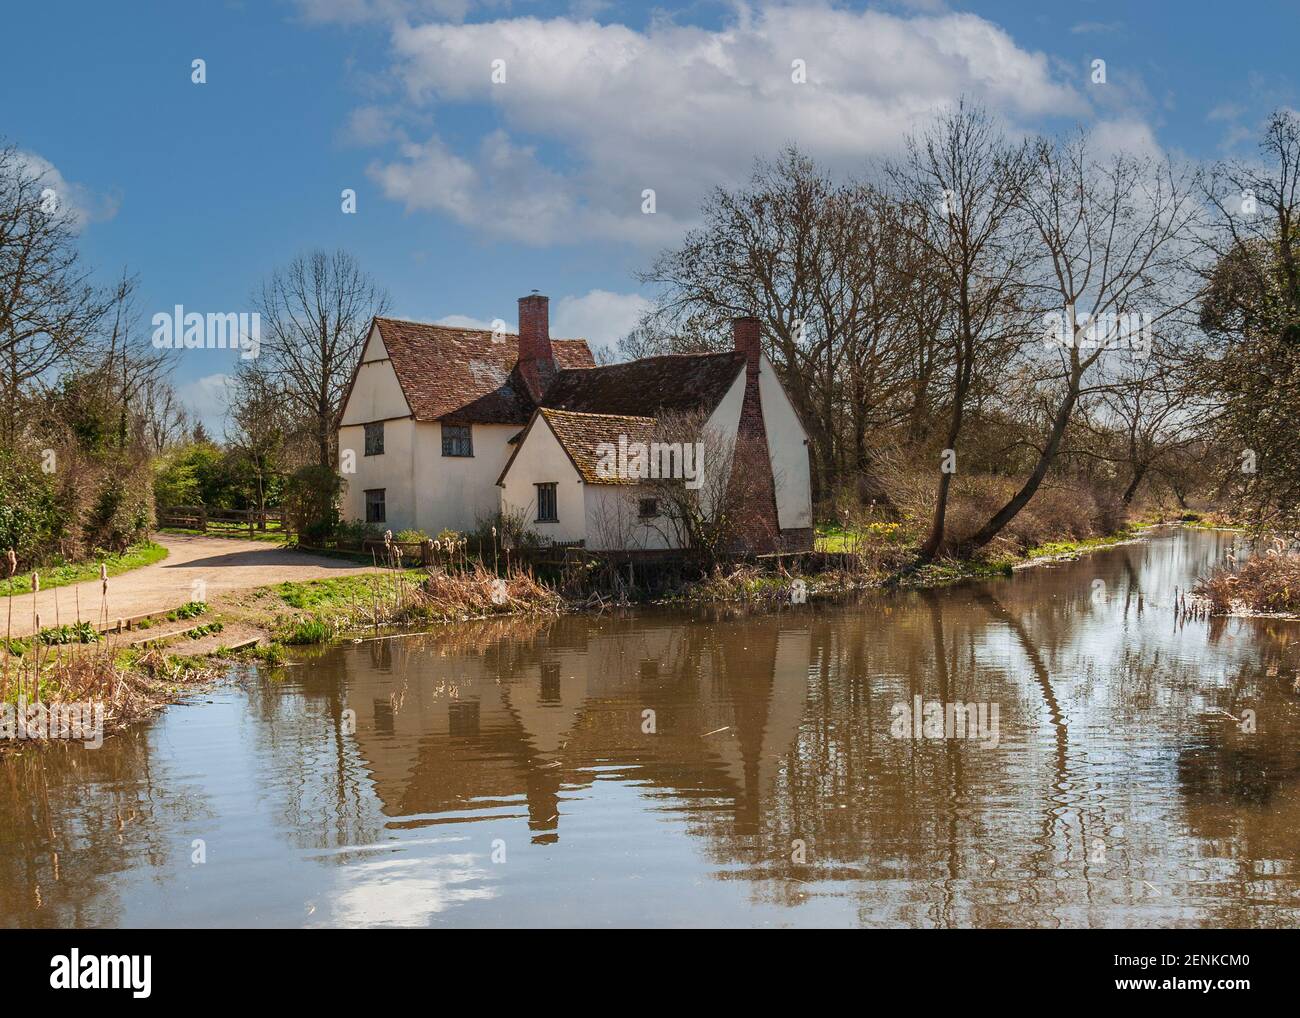 Willy Lott's Cottage is a house in Flatford, East Bergholt, Suffolk, England which appears in several paintings by John Constable,  The Hay Wain Stock Photo